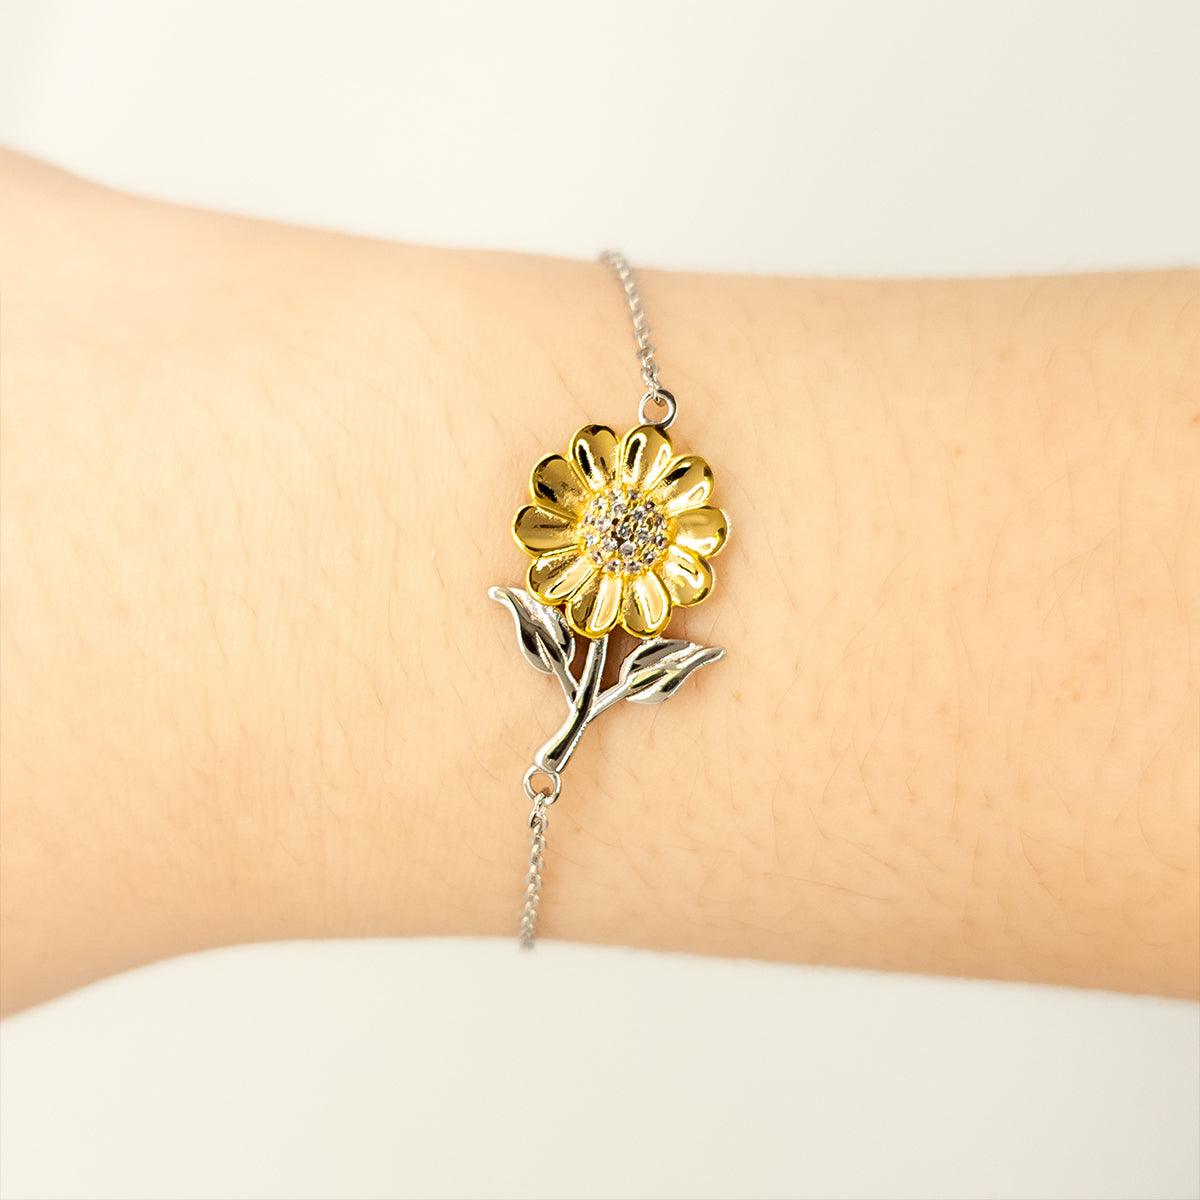 Oil Worker Sunflower Bracelet - Thanks for being who you are - Birthday Christmas Jewelry Gifts Coworkers Colleague Boss - Mallard Moon Gift Shop